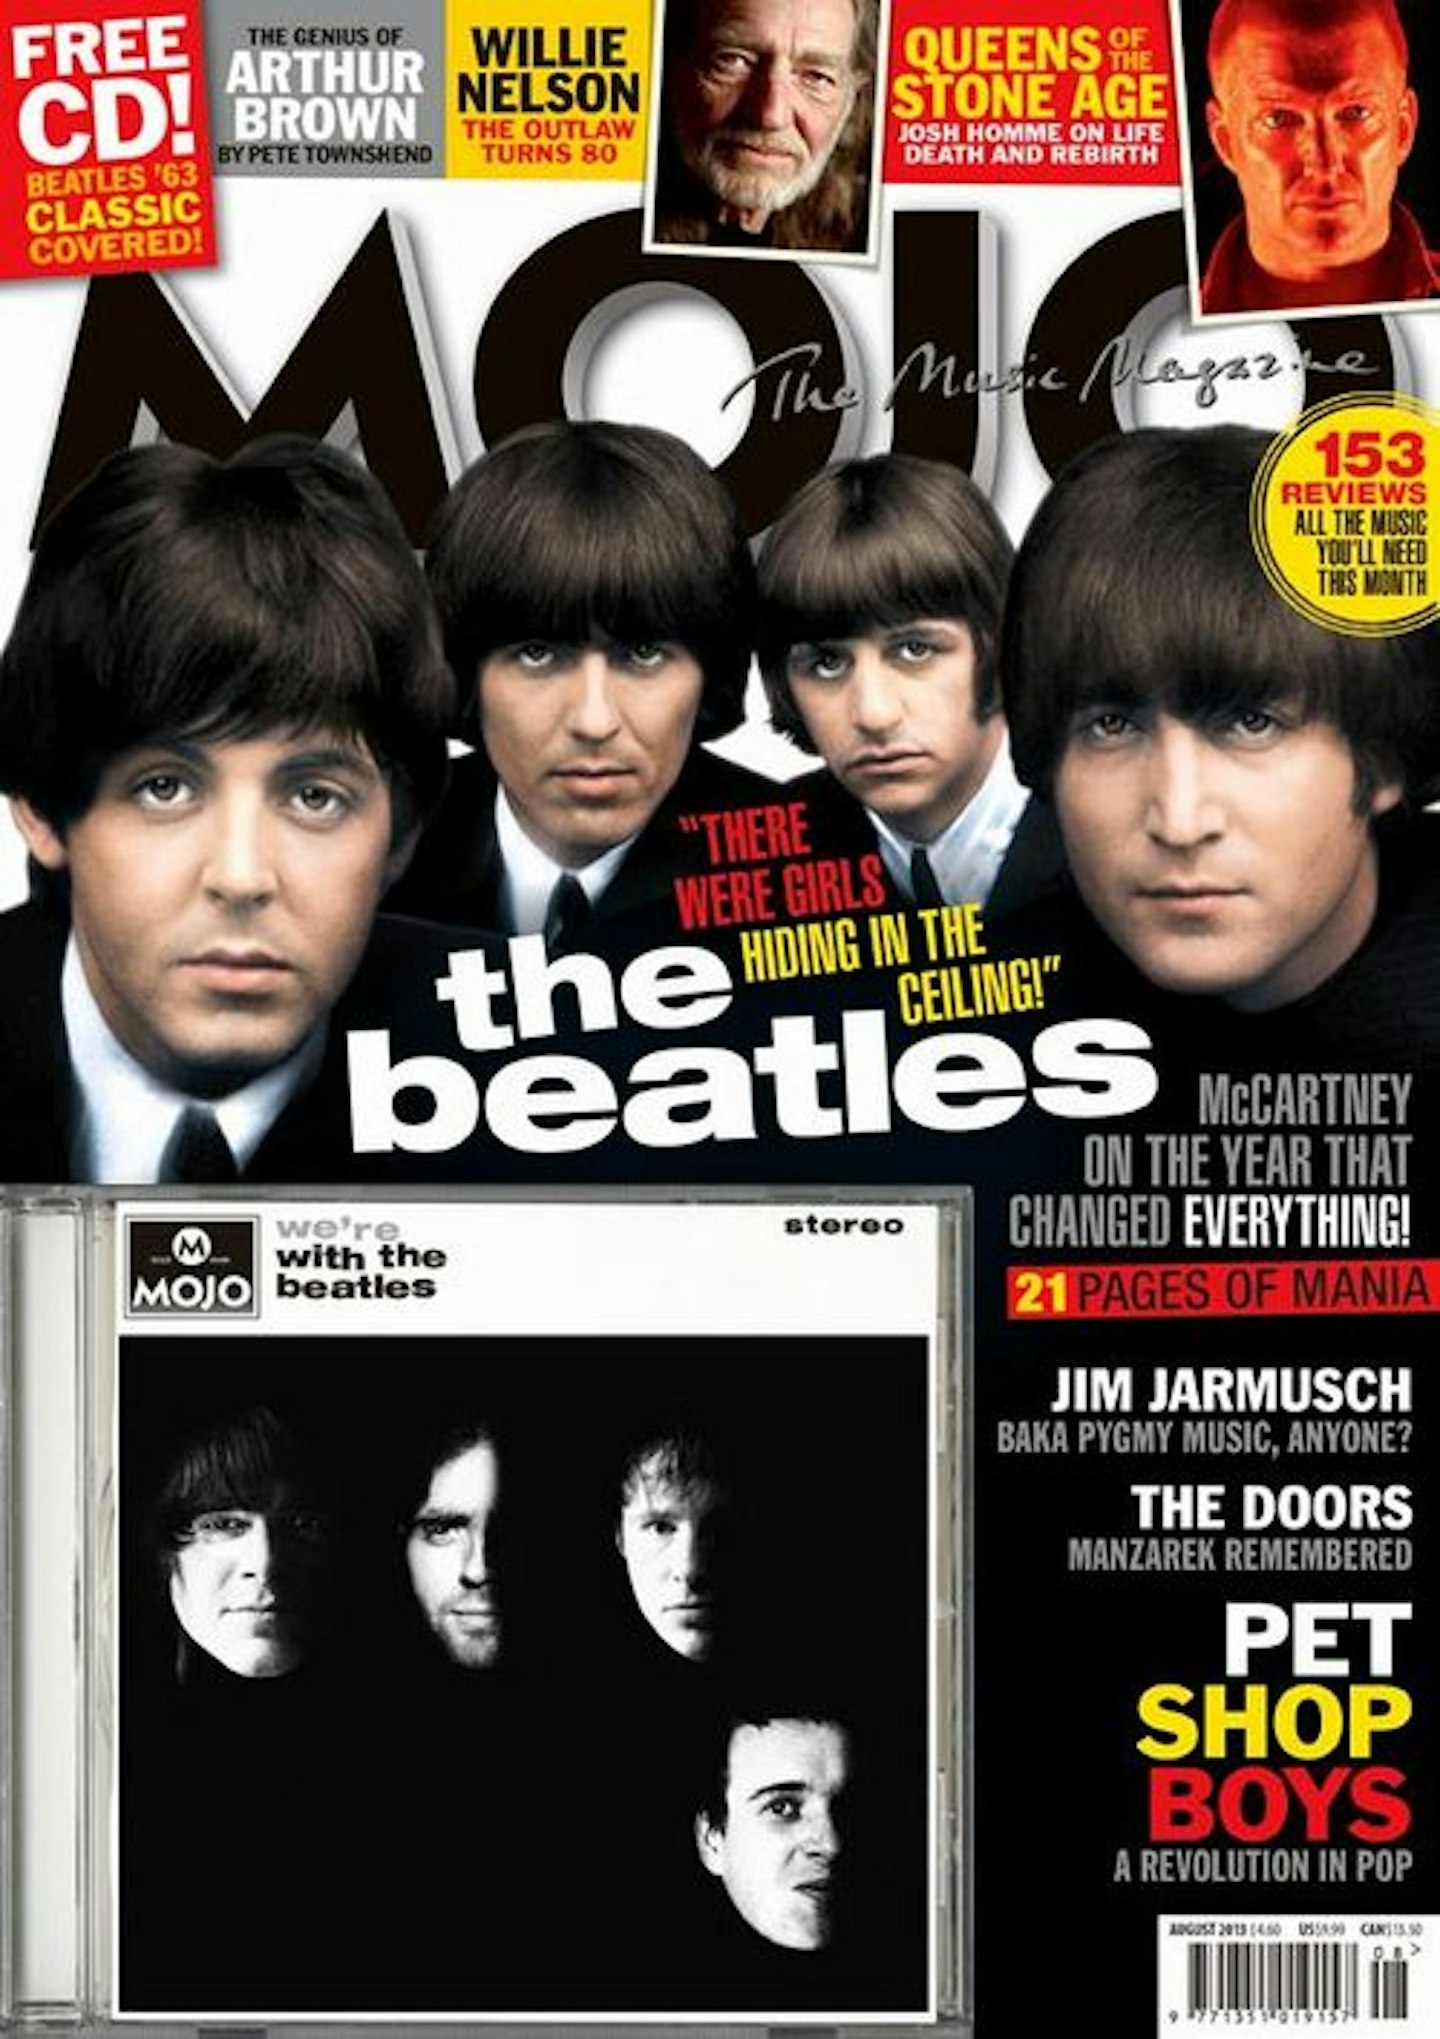 MOJO Issue 237 / August 2013